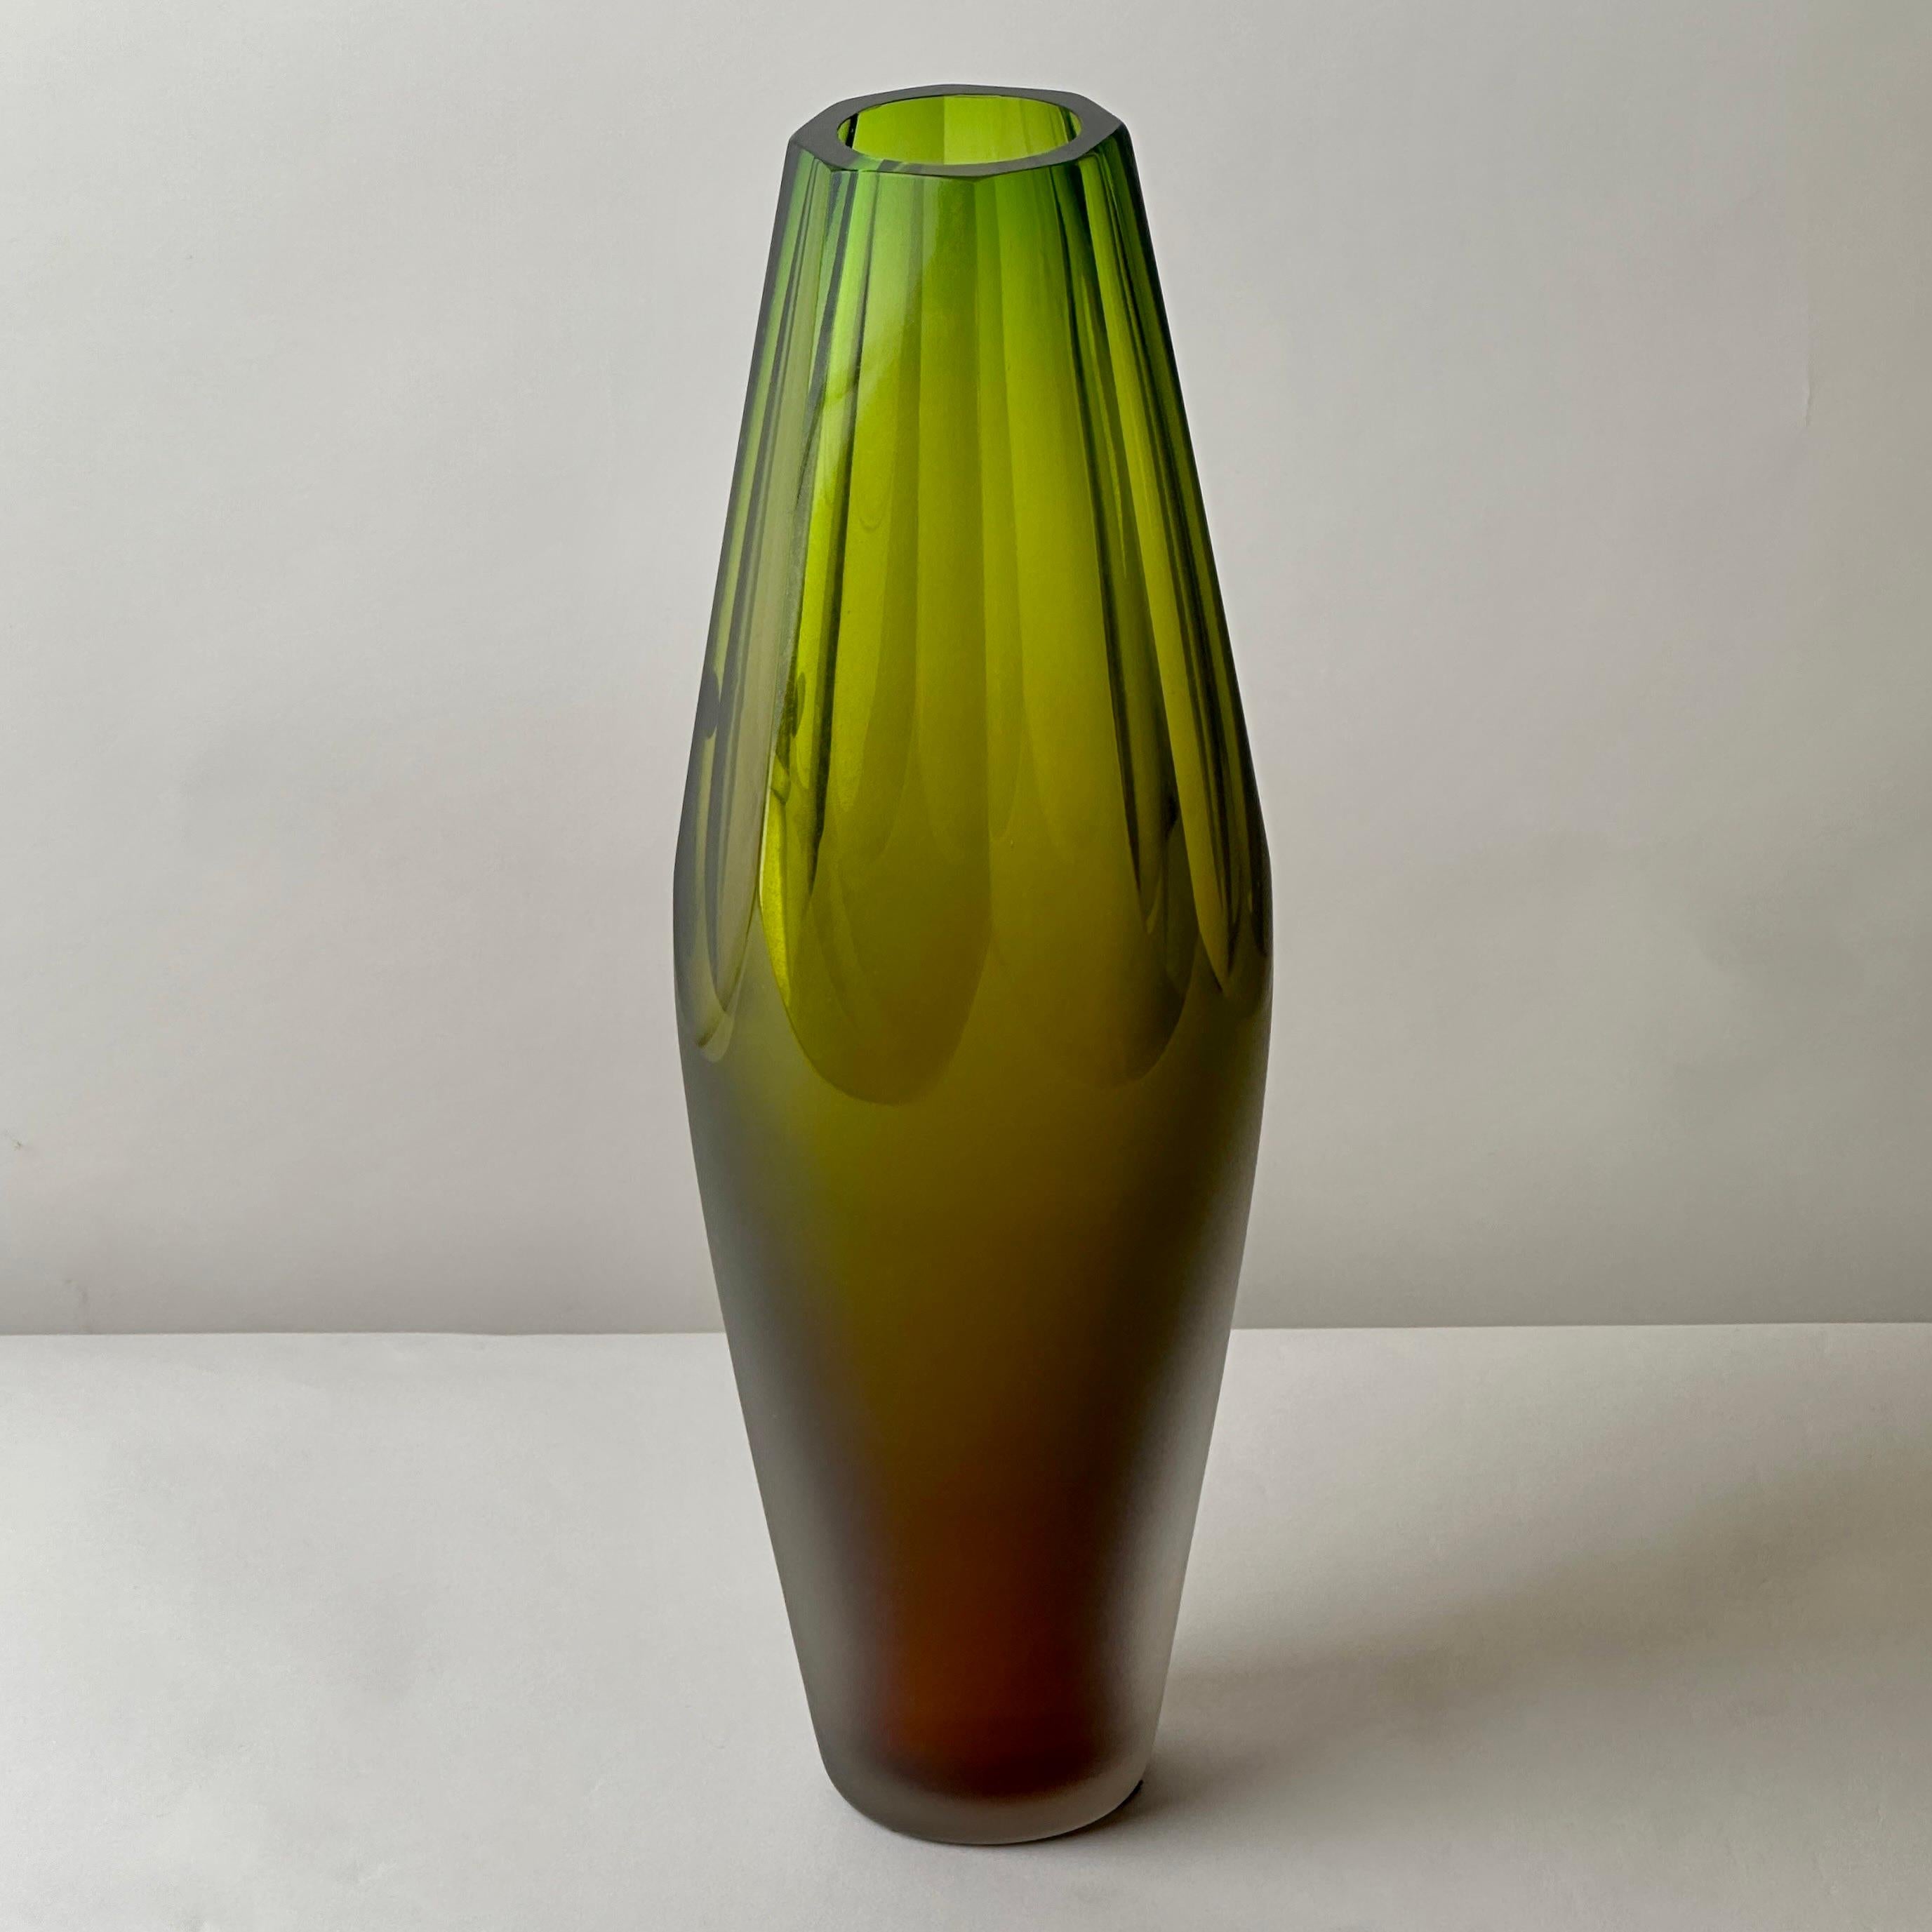 Modern and sleek hand faceted Murano glass vase with a reddish hue on the bottom of the vase. 
Hand signed by the Murano maker underneath the bottom.

About Vetreria Artistica Vivarini:

Vivarini's glassworks was established in 1967. The aim of the